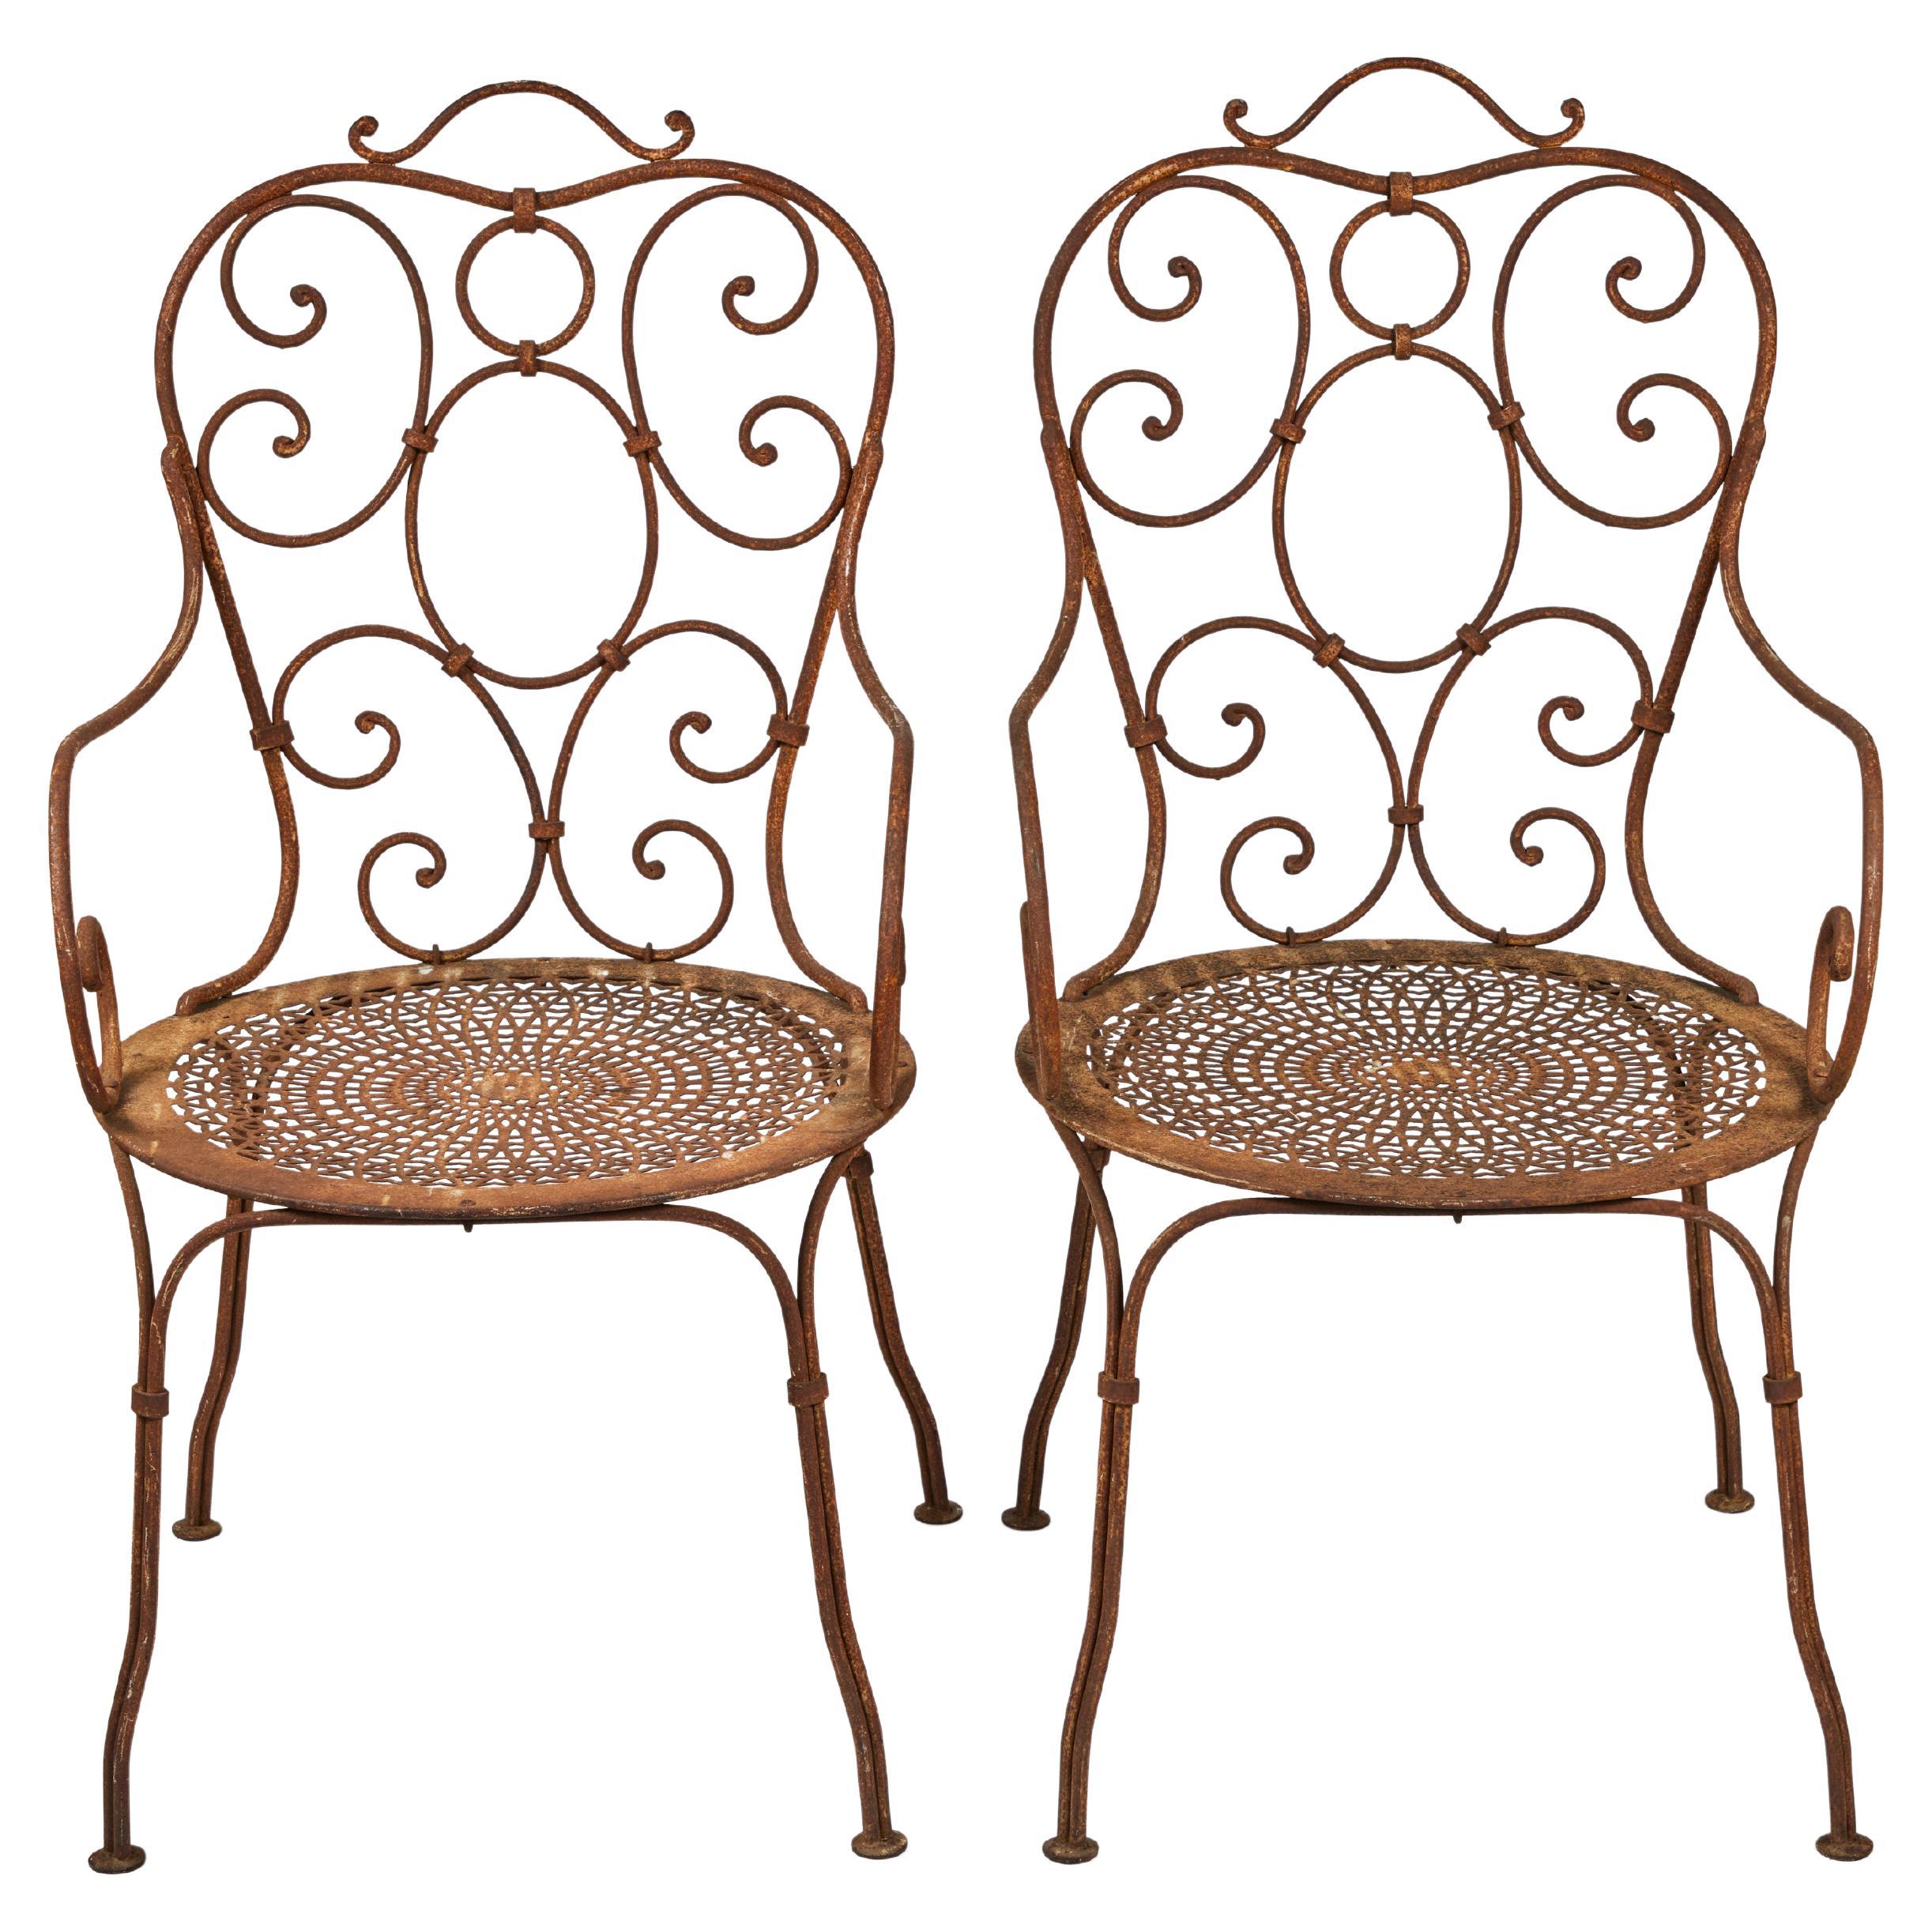 Pair of Vintage French Wrought Iron Garden Chairs